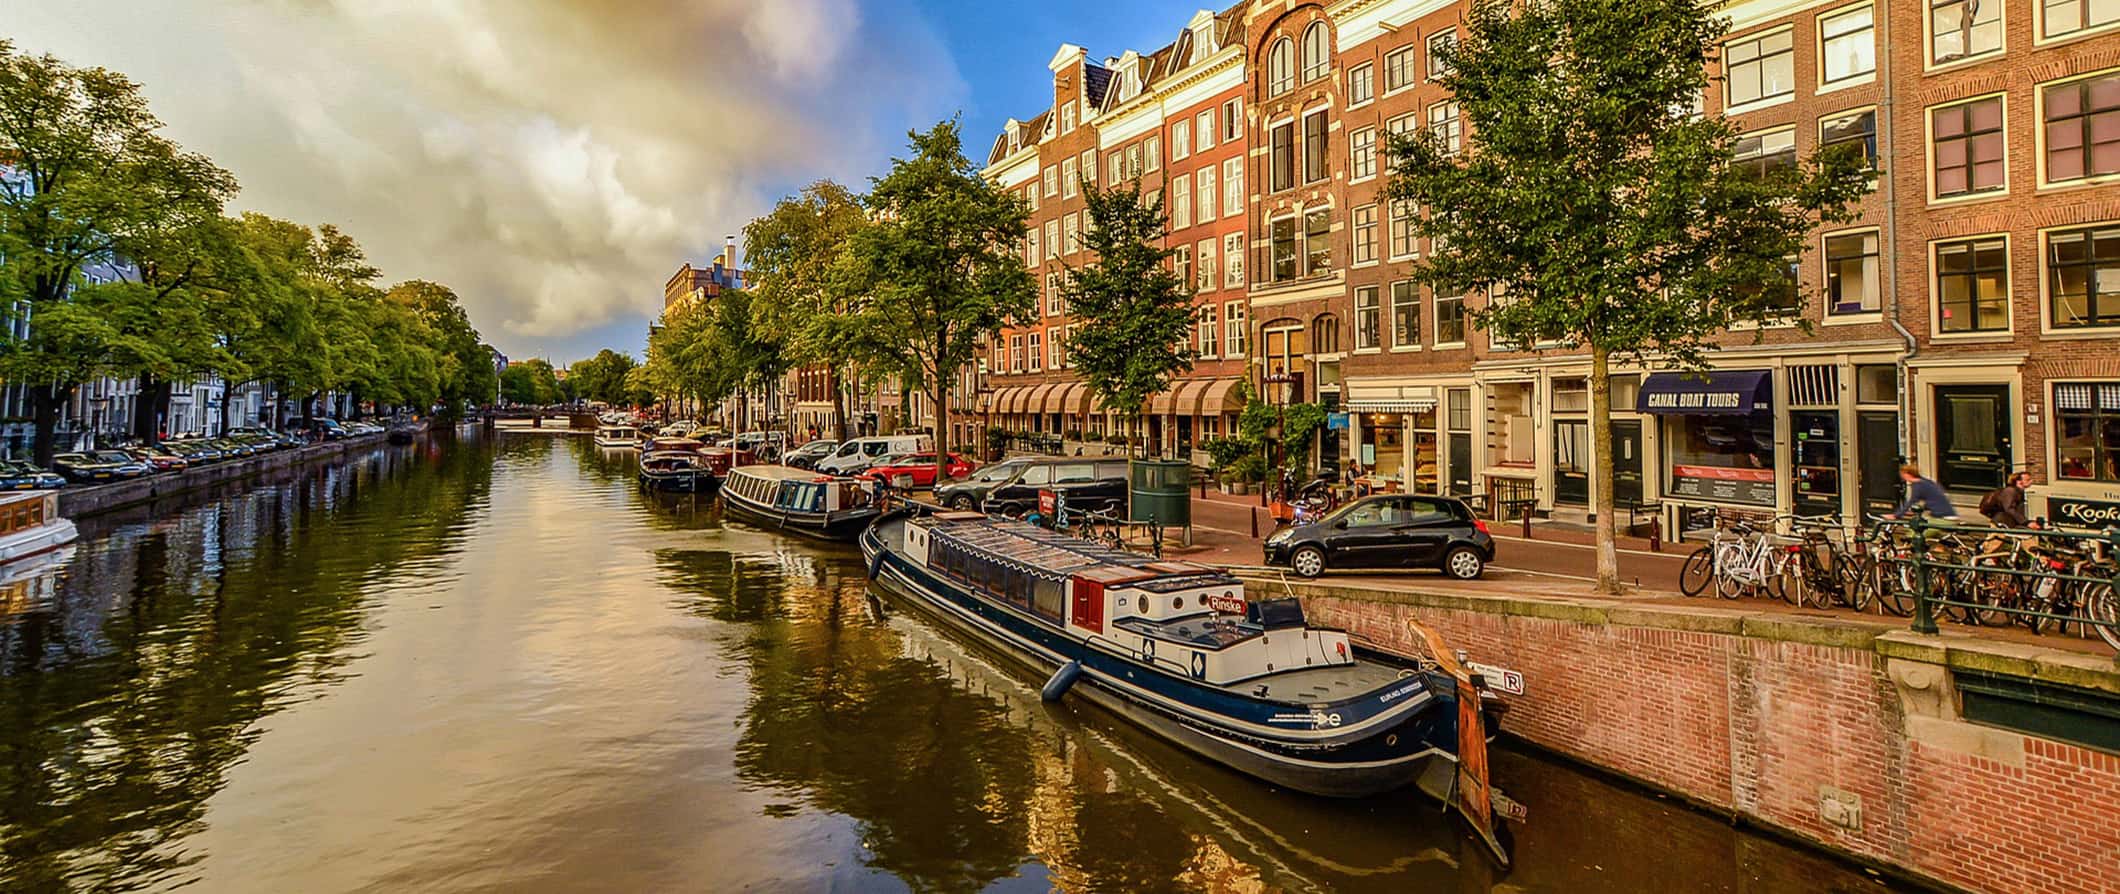 The scenic canals in Amsterdam, Netherlands